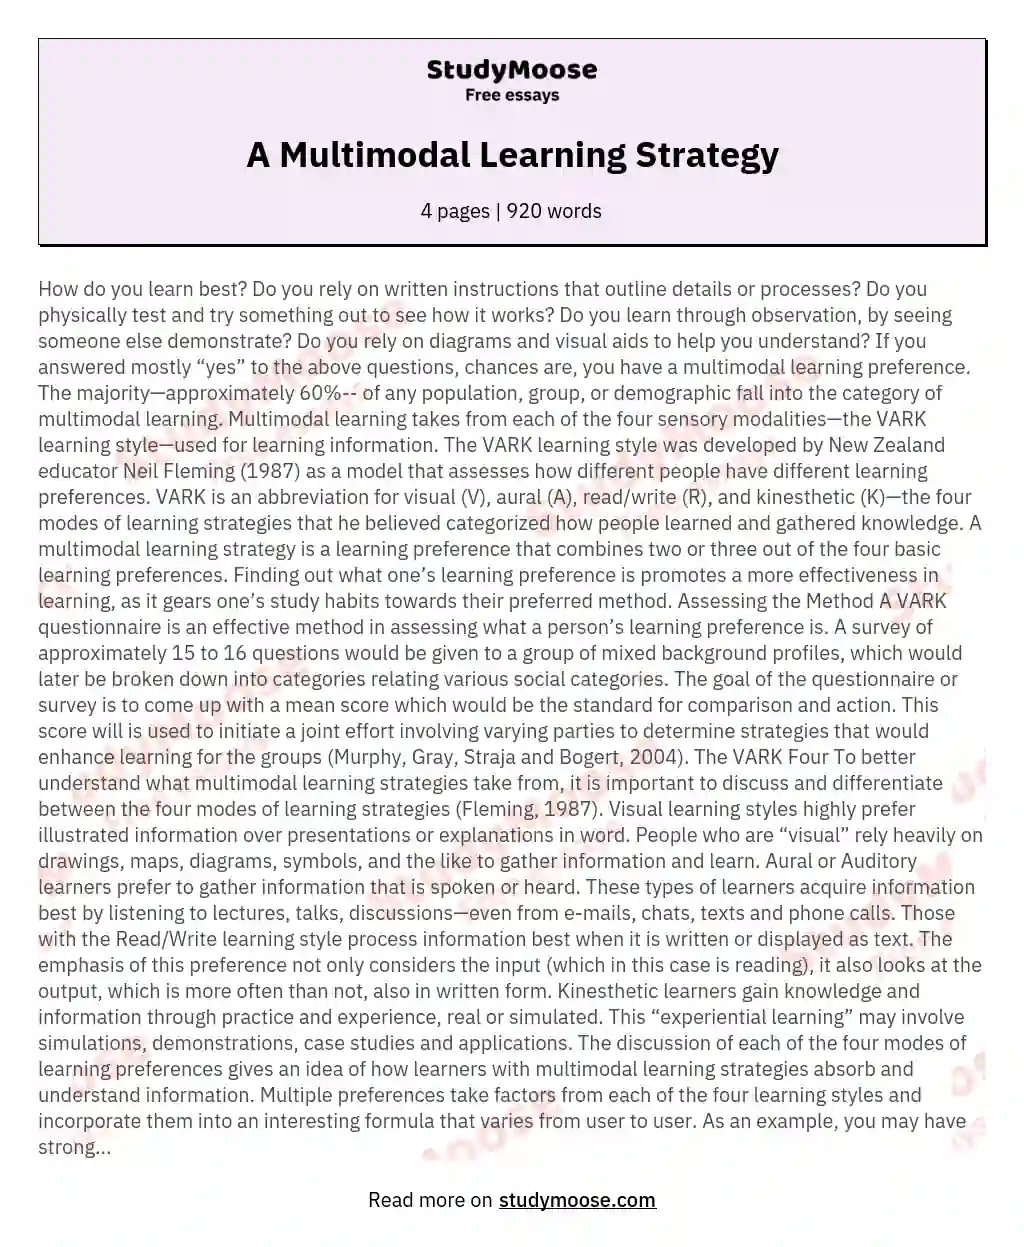 A Multimodal Learning Strategy essay